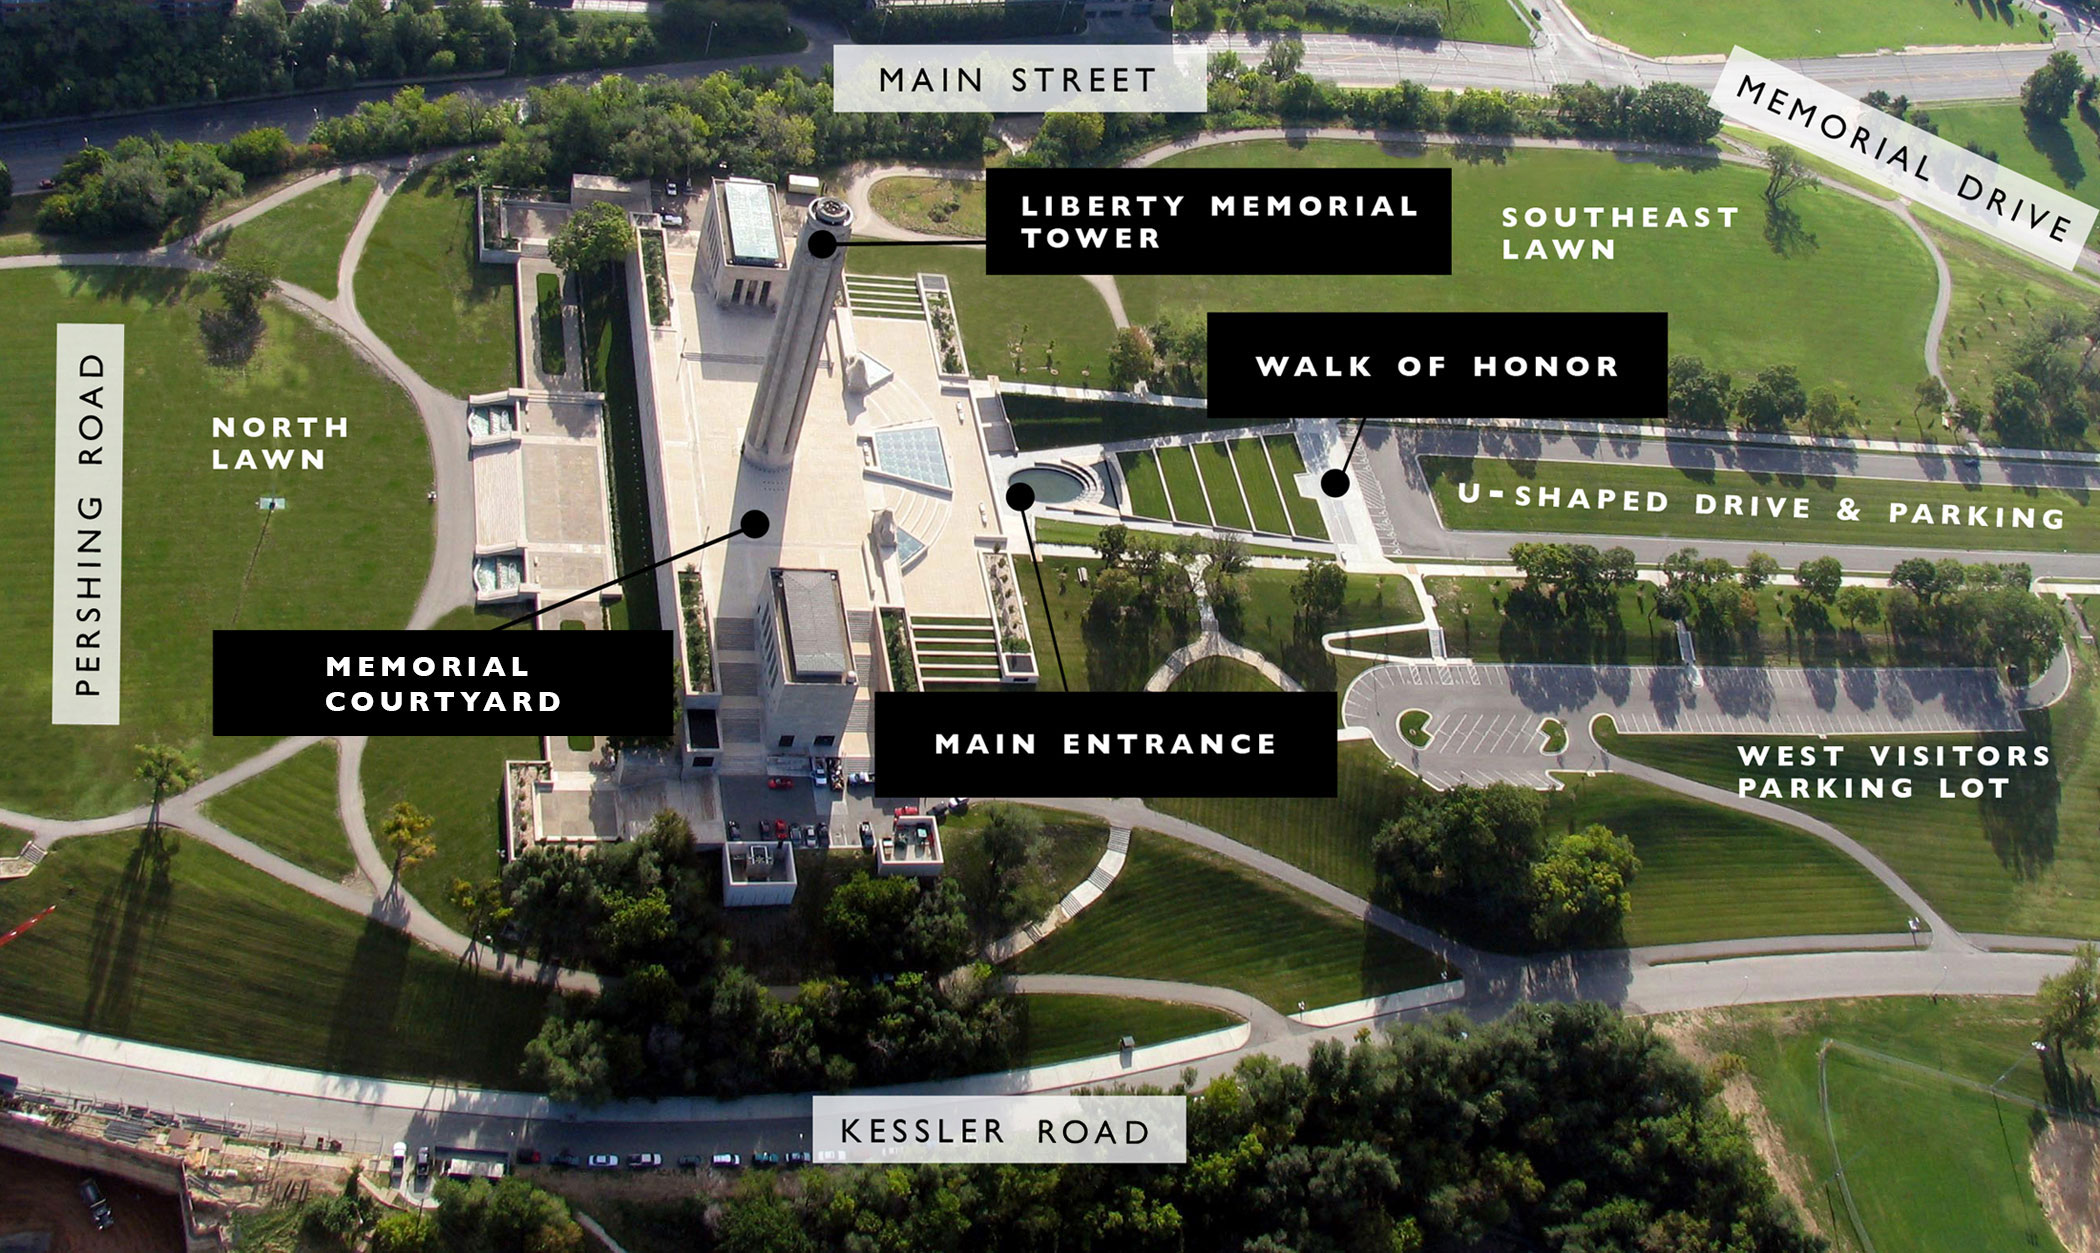 Aerial photograph of the Museum and Memorial grounds with markings for parking